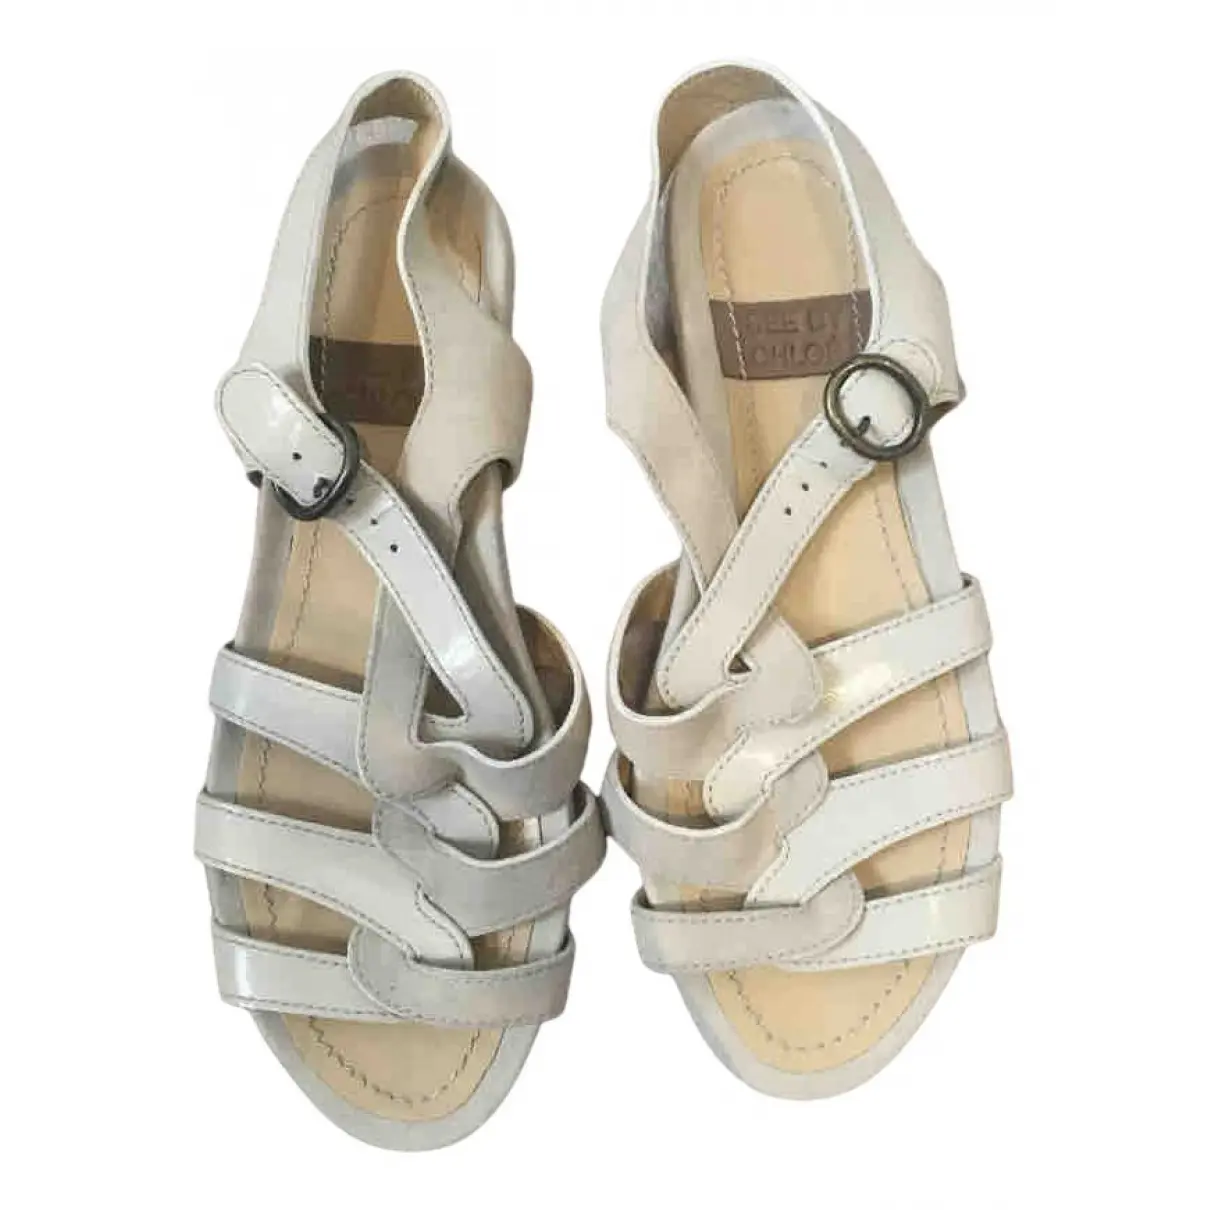 Leather sandal See by Chloé